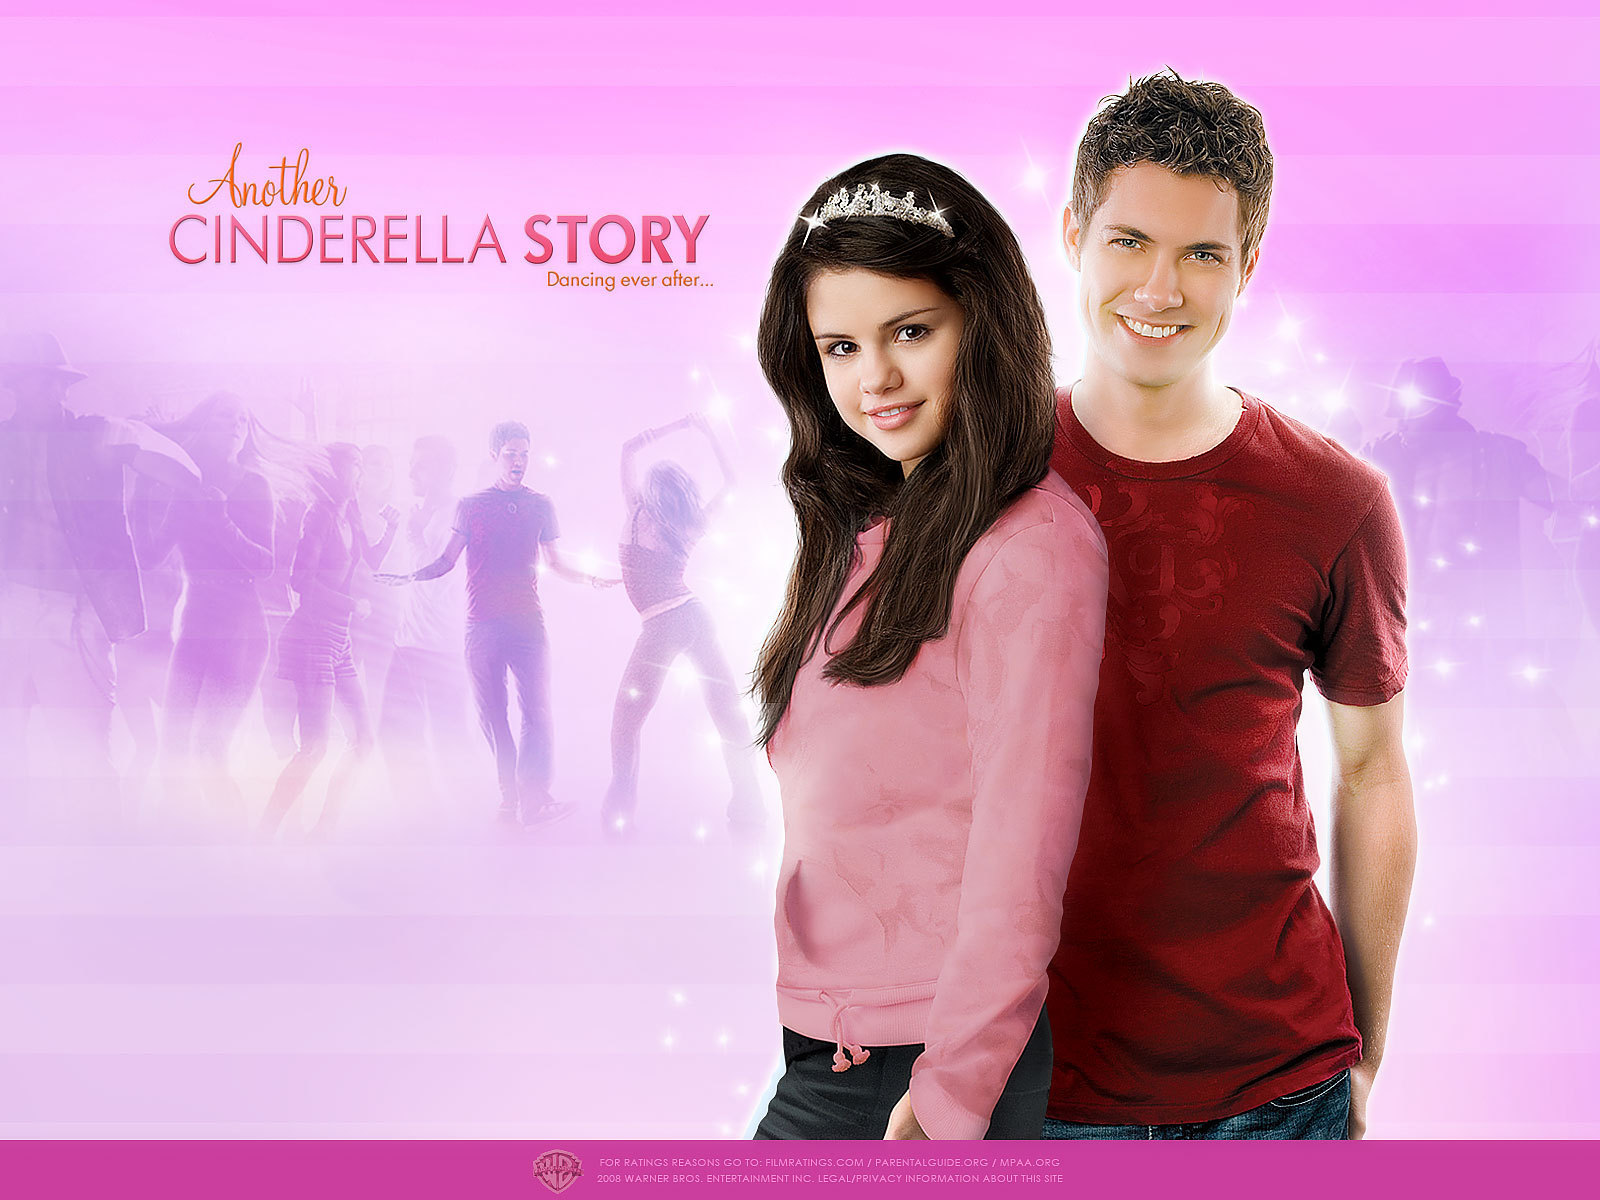 http://images2.fanpop.com/images/photos/3400000/walpaper-1-another-cinderella-story-3469419-1600-1200.jpg